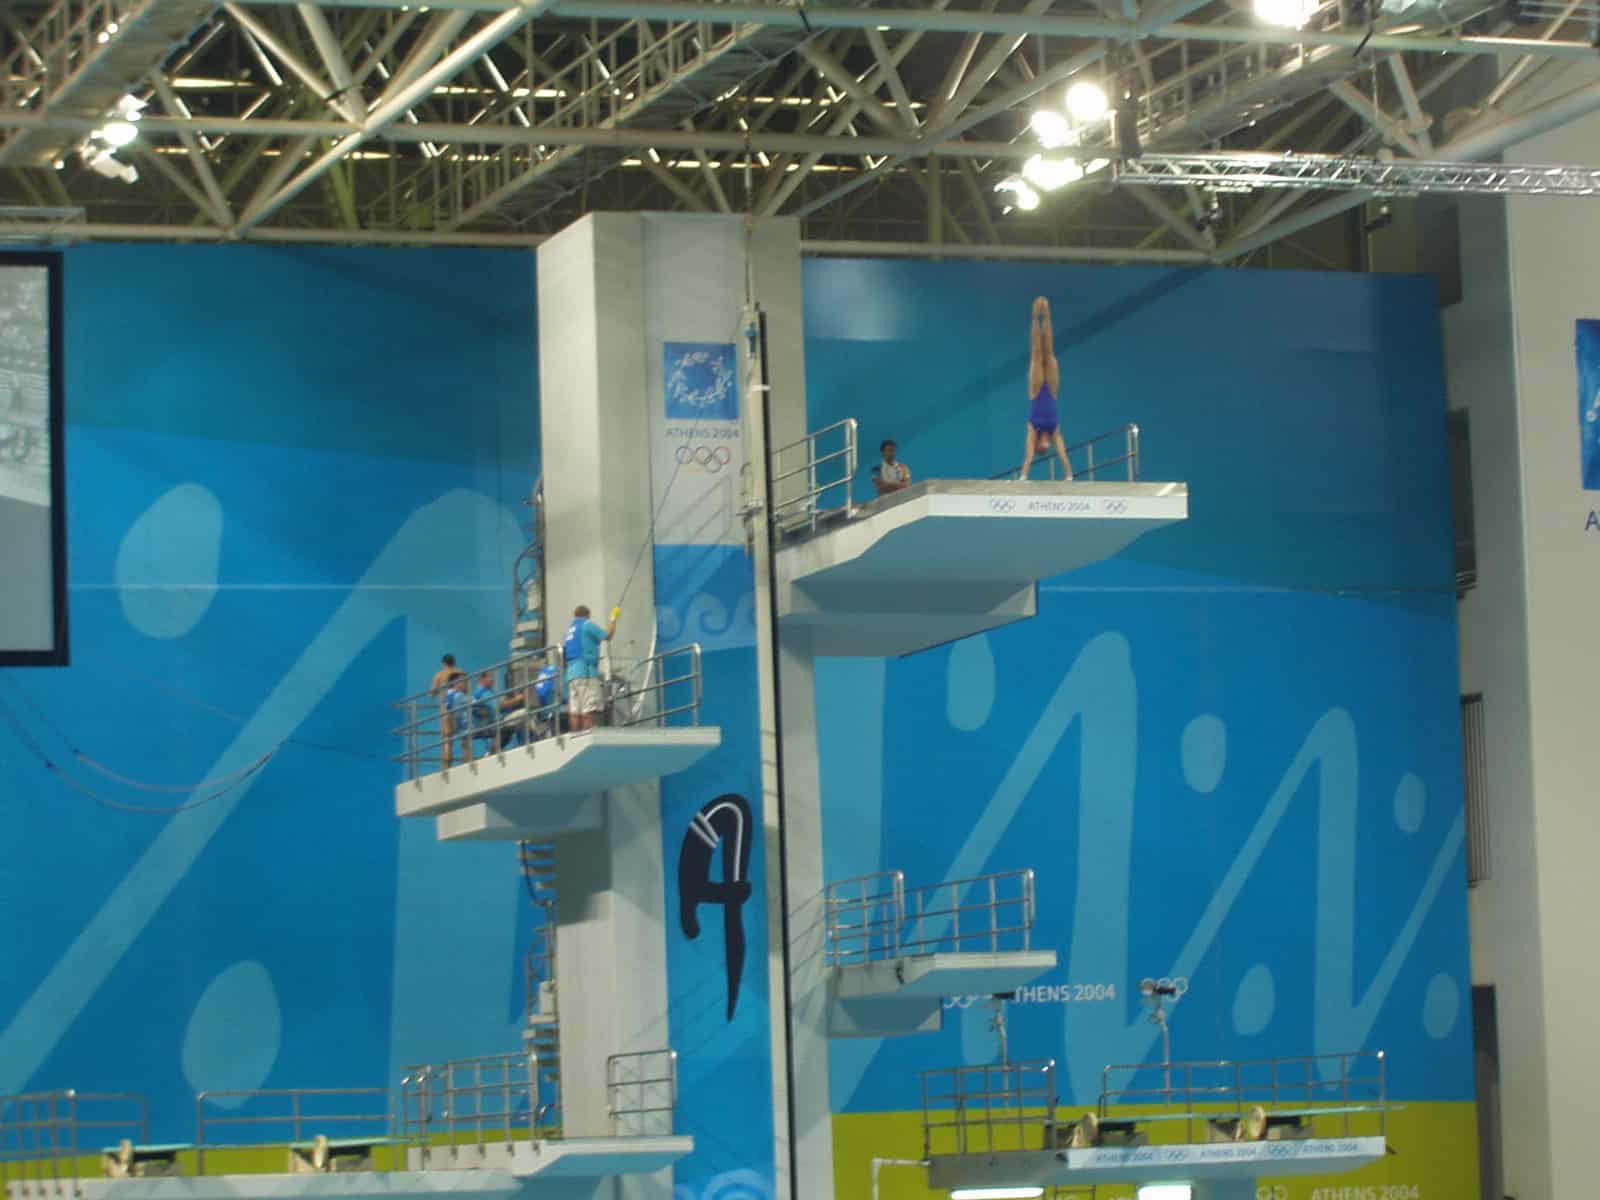 diving-tower-athens-2004-olympic-games-page-image